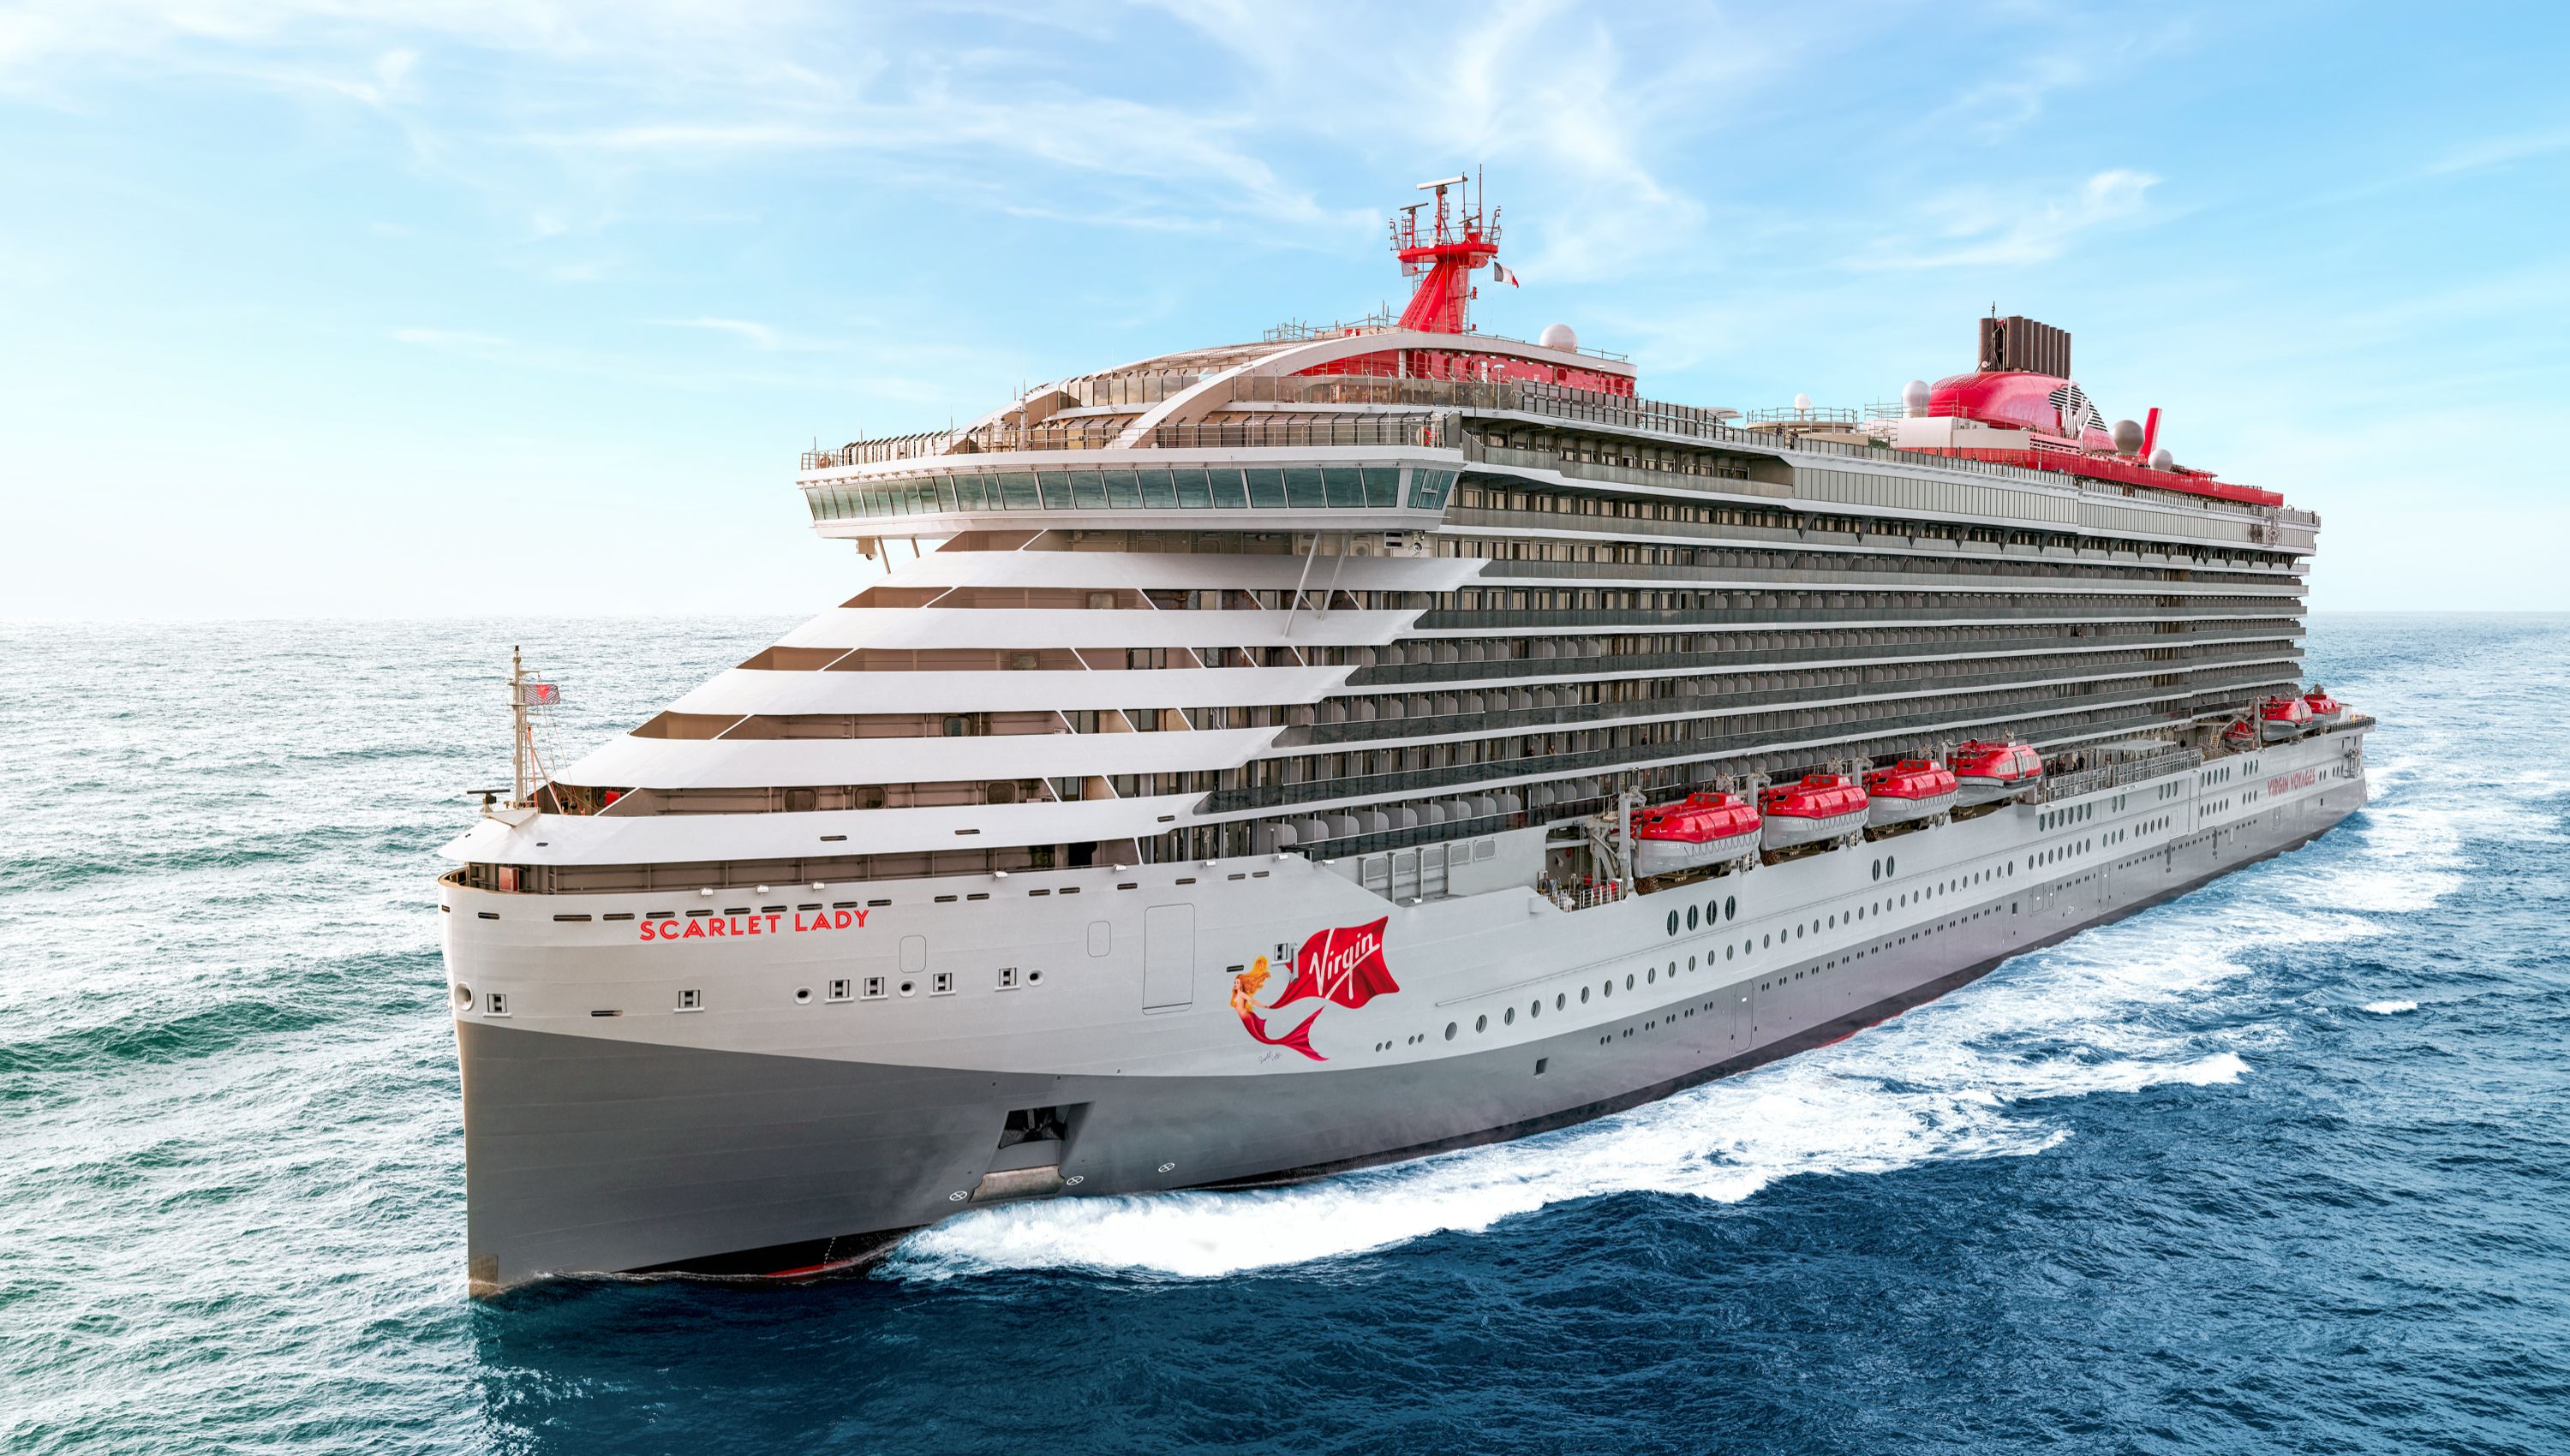 Heres How Virgin Voyages is Reinventing Cruising pic